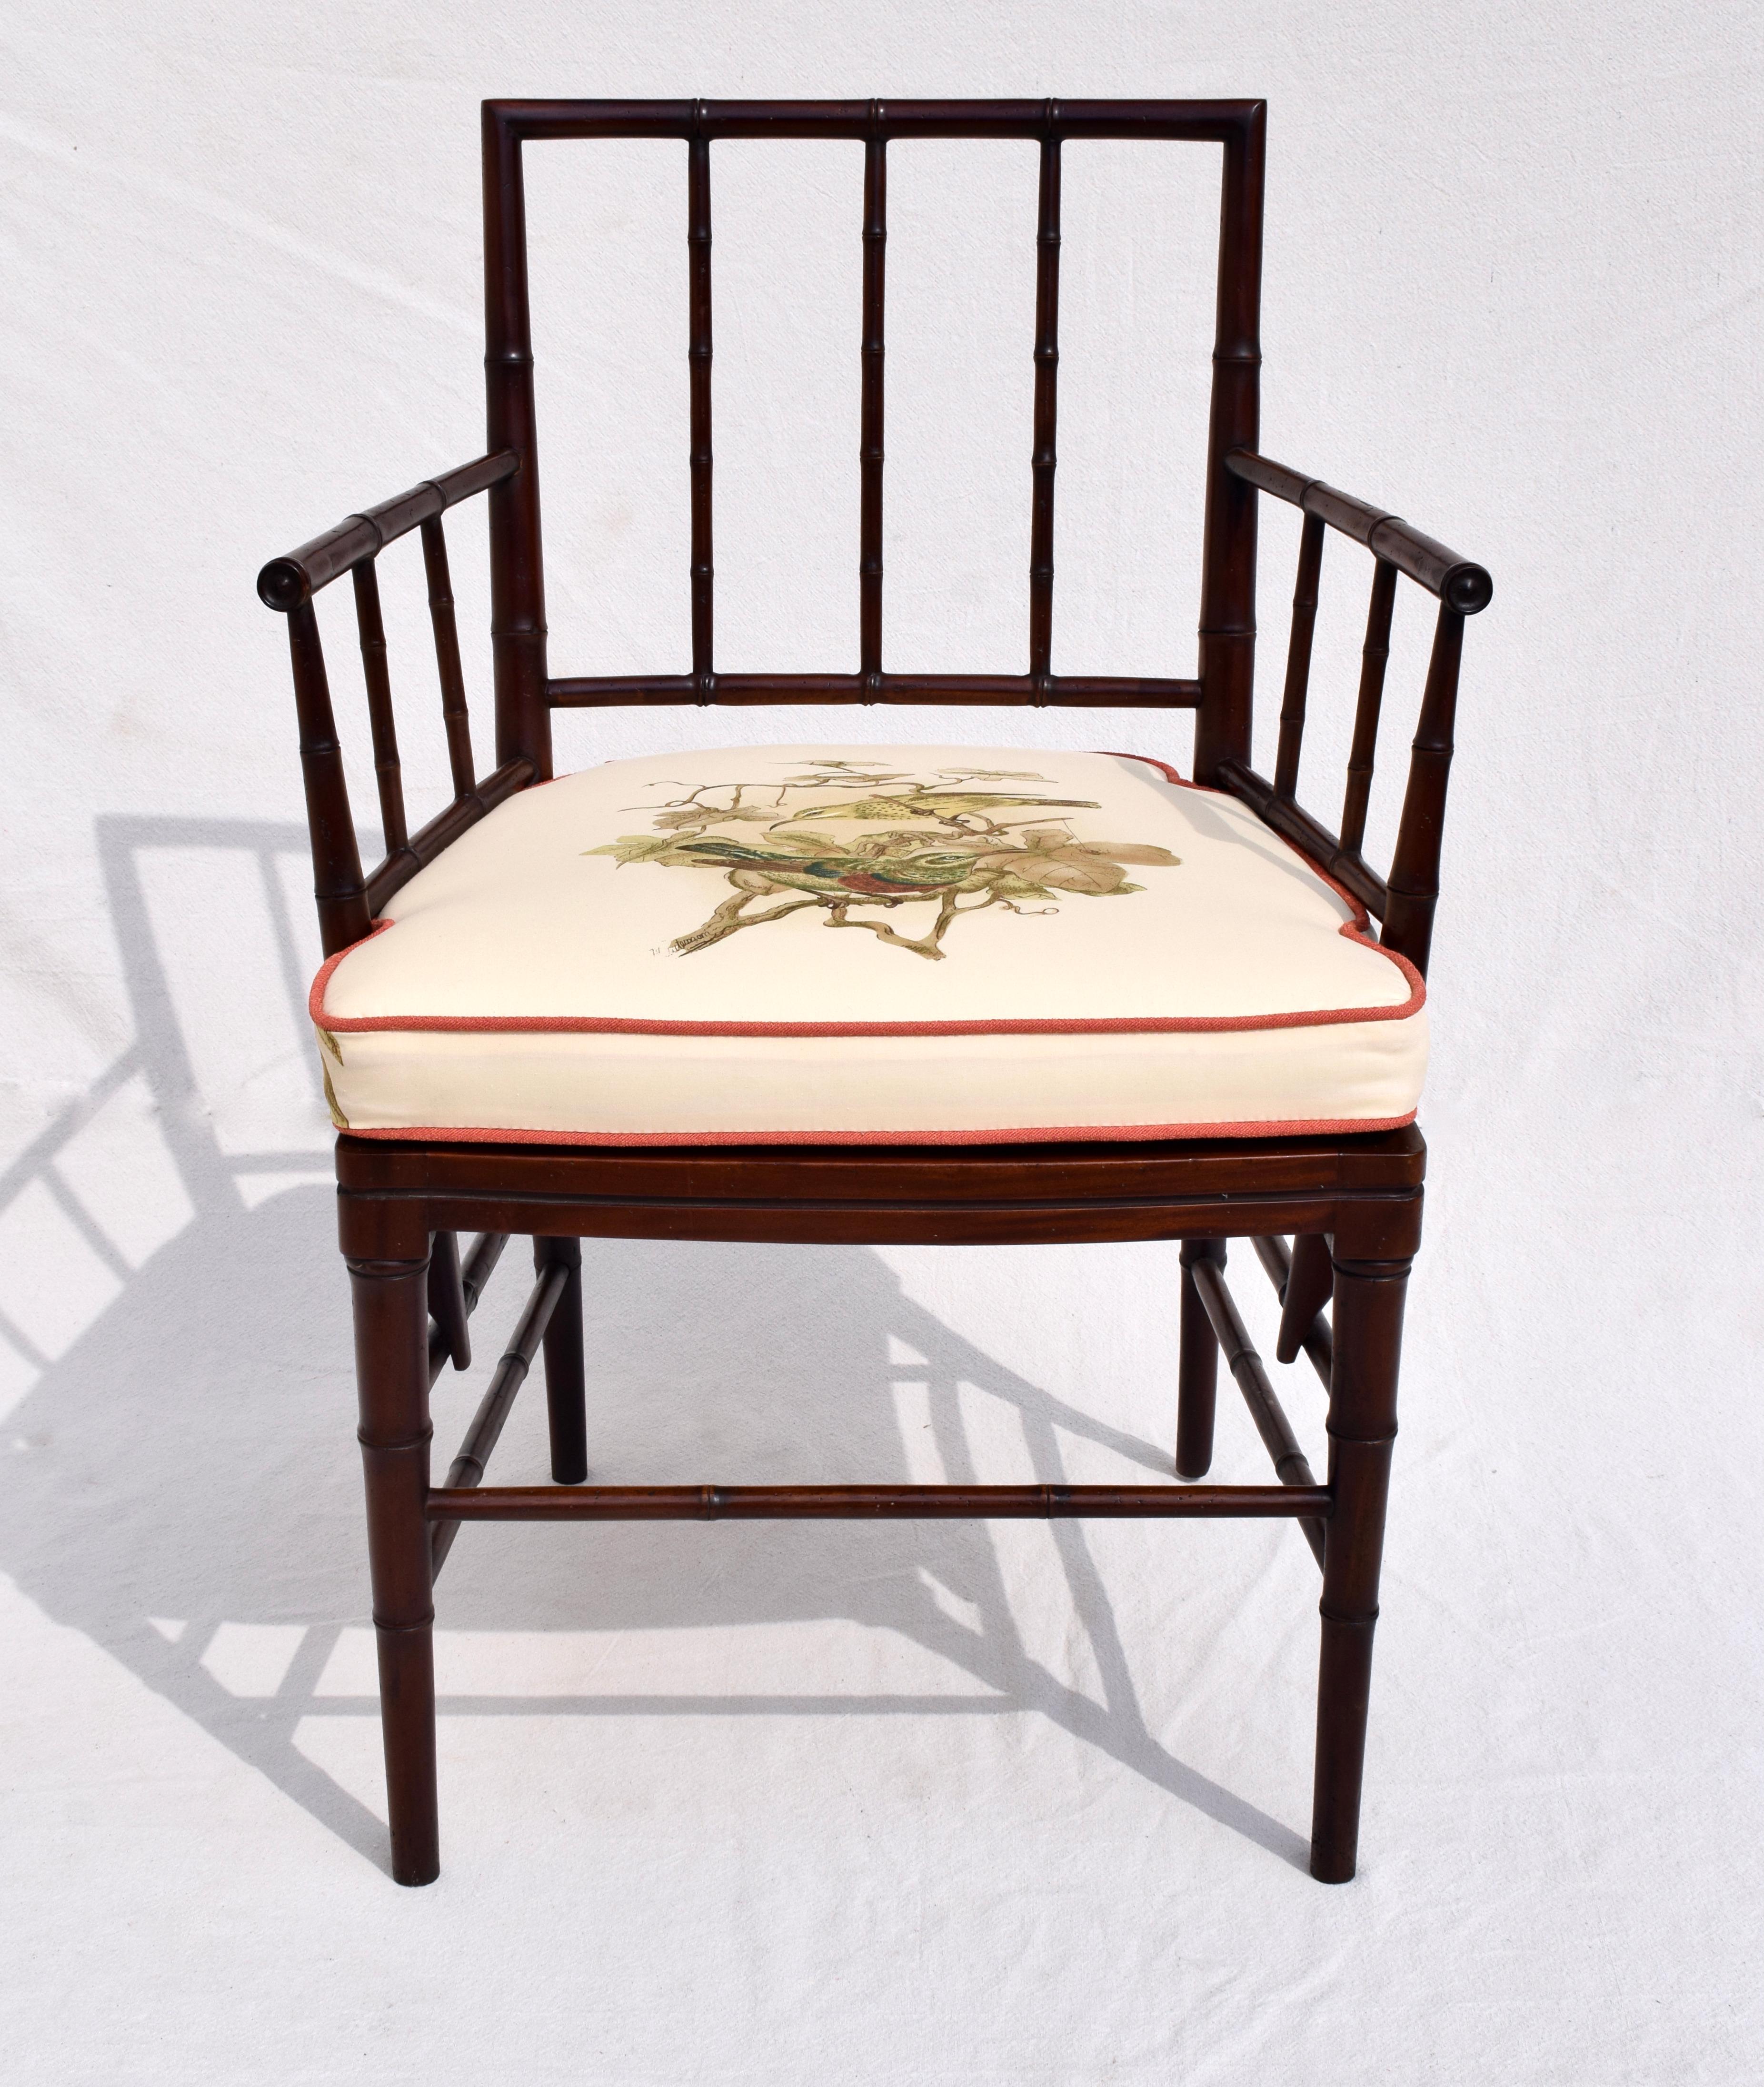 An exceptional English Regency style French caned faux bamboo armchair enhanced with custom American song birds notched cushion. Measures: Seat 18